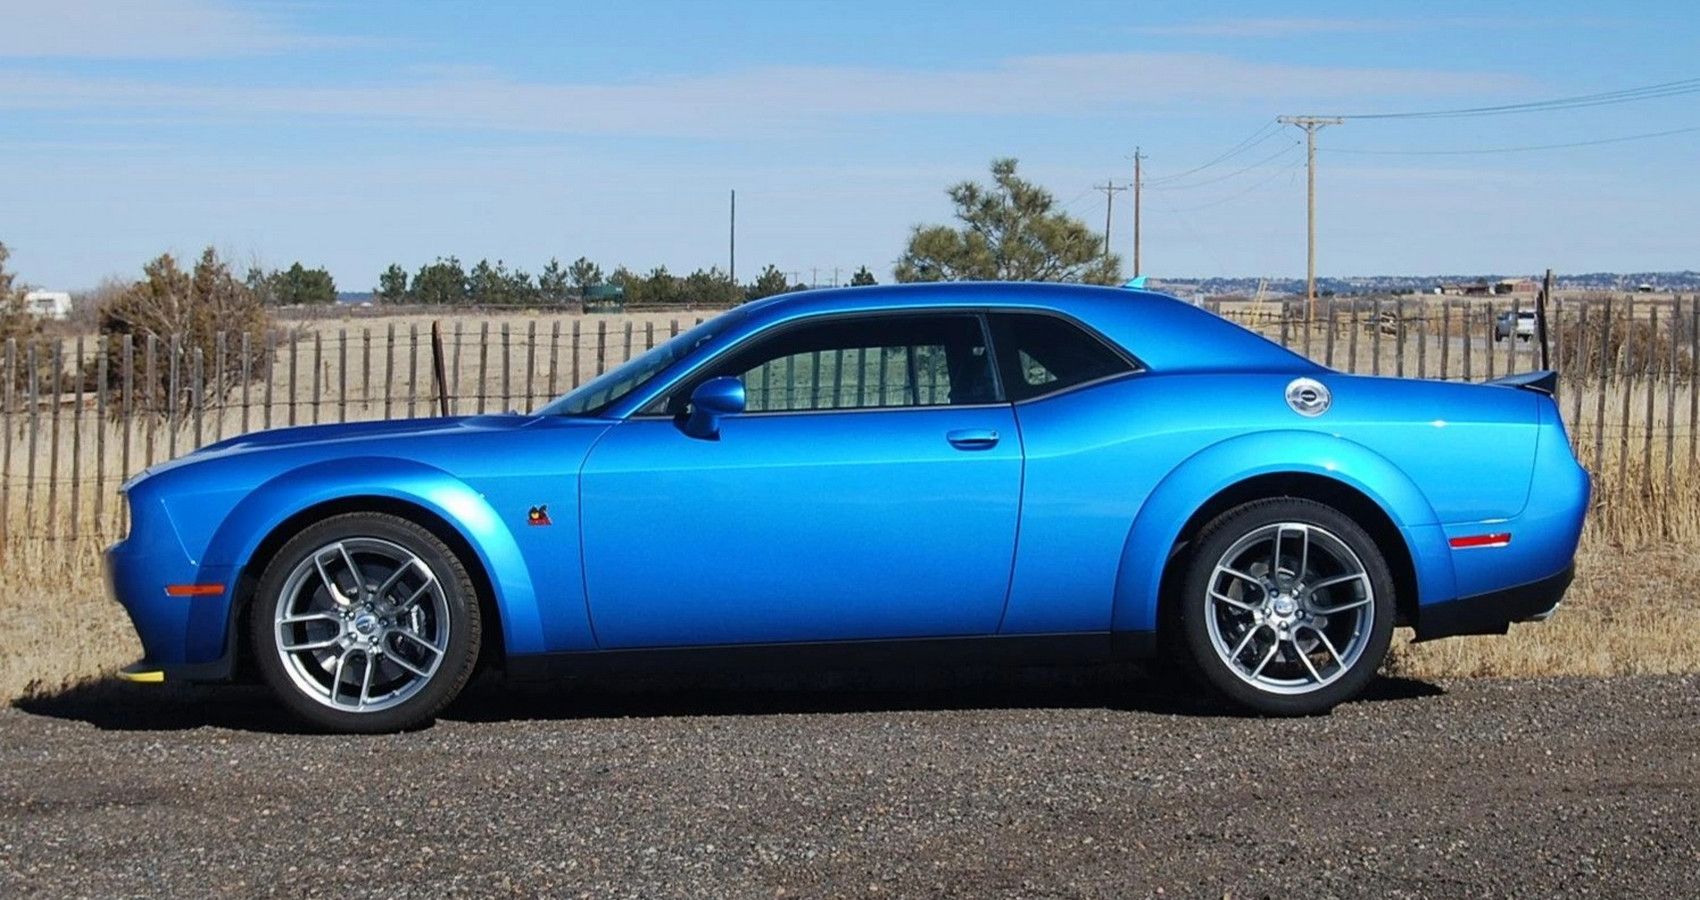 Blue Dodge Challenger RT on the road